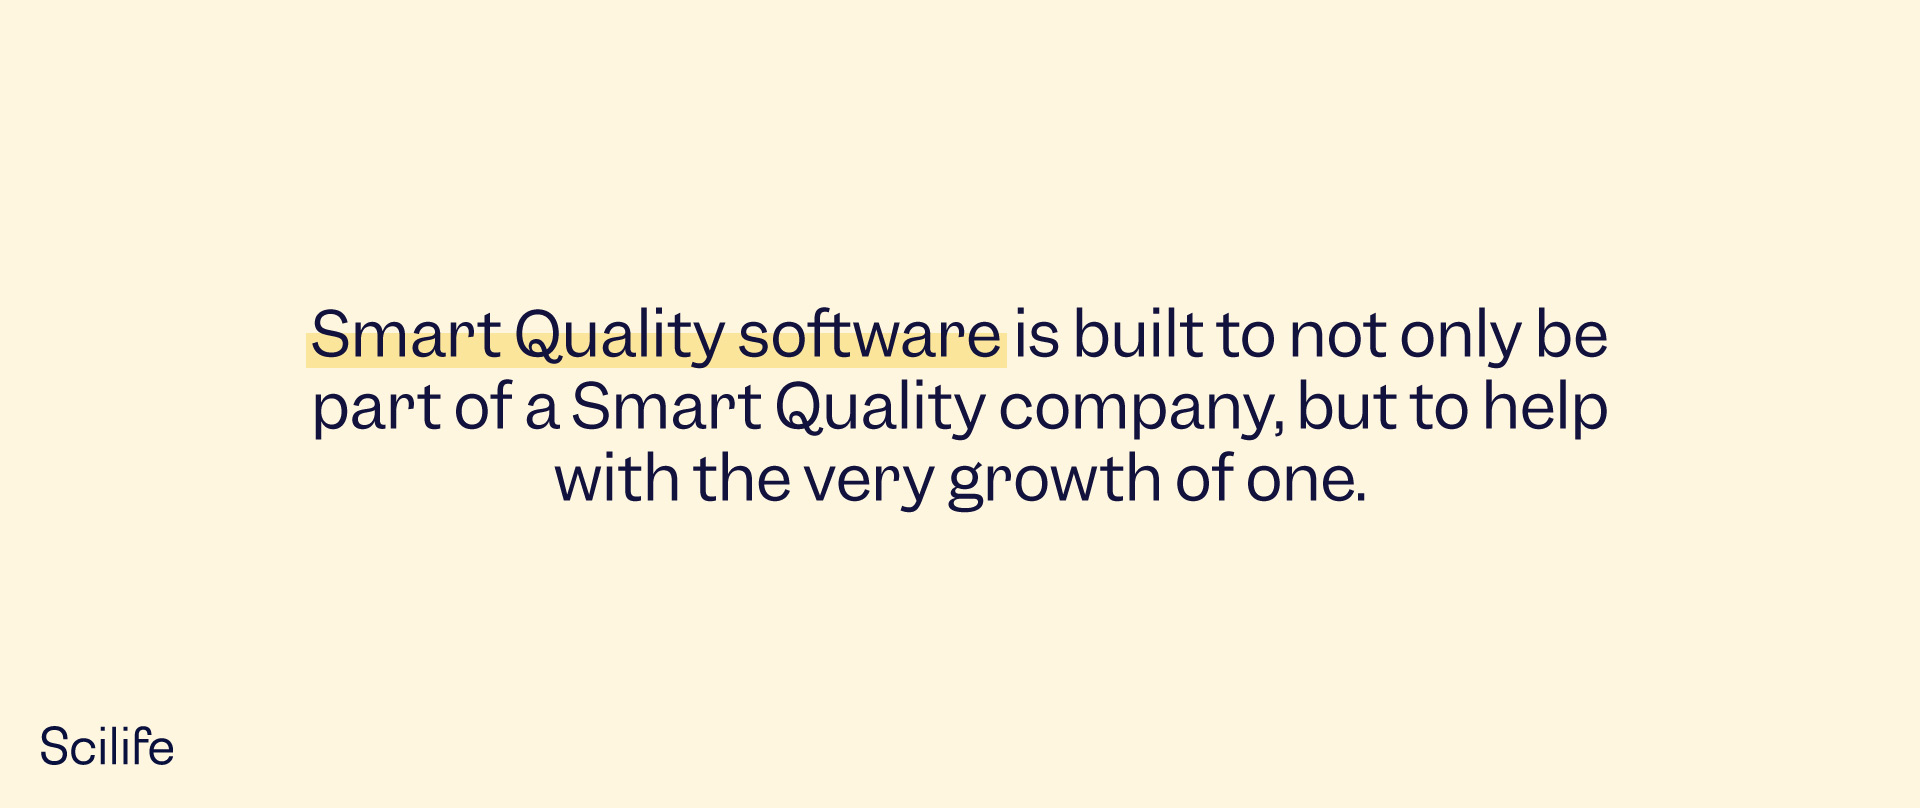 Smart Quality Software infographic | Scilife